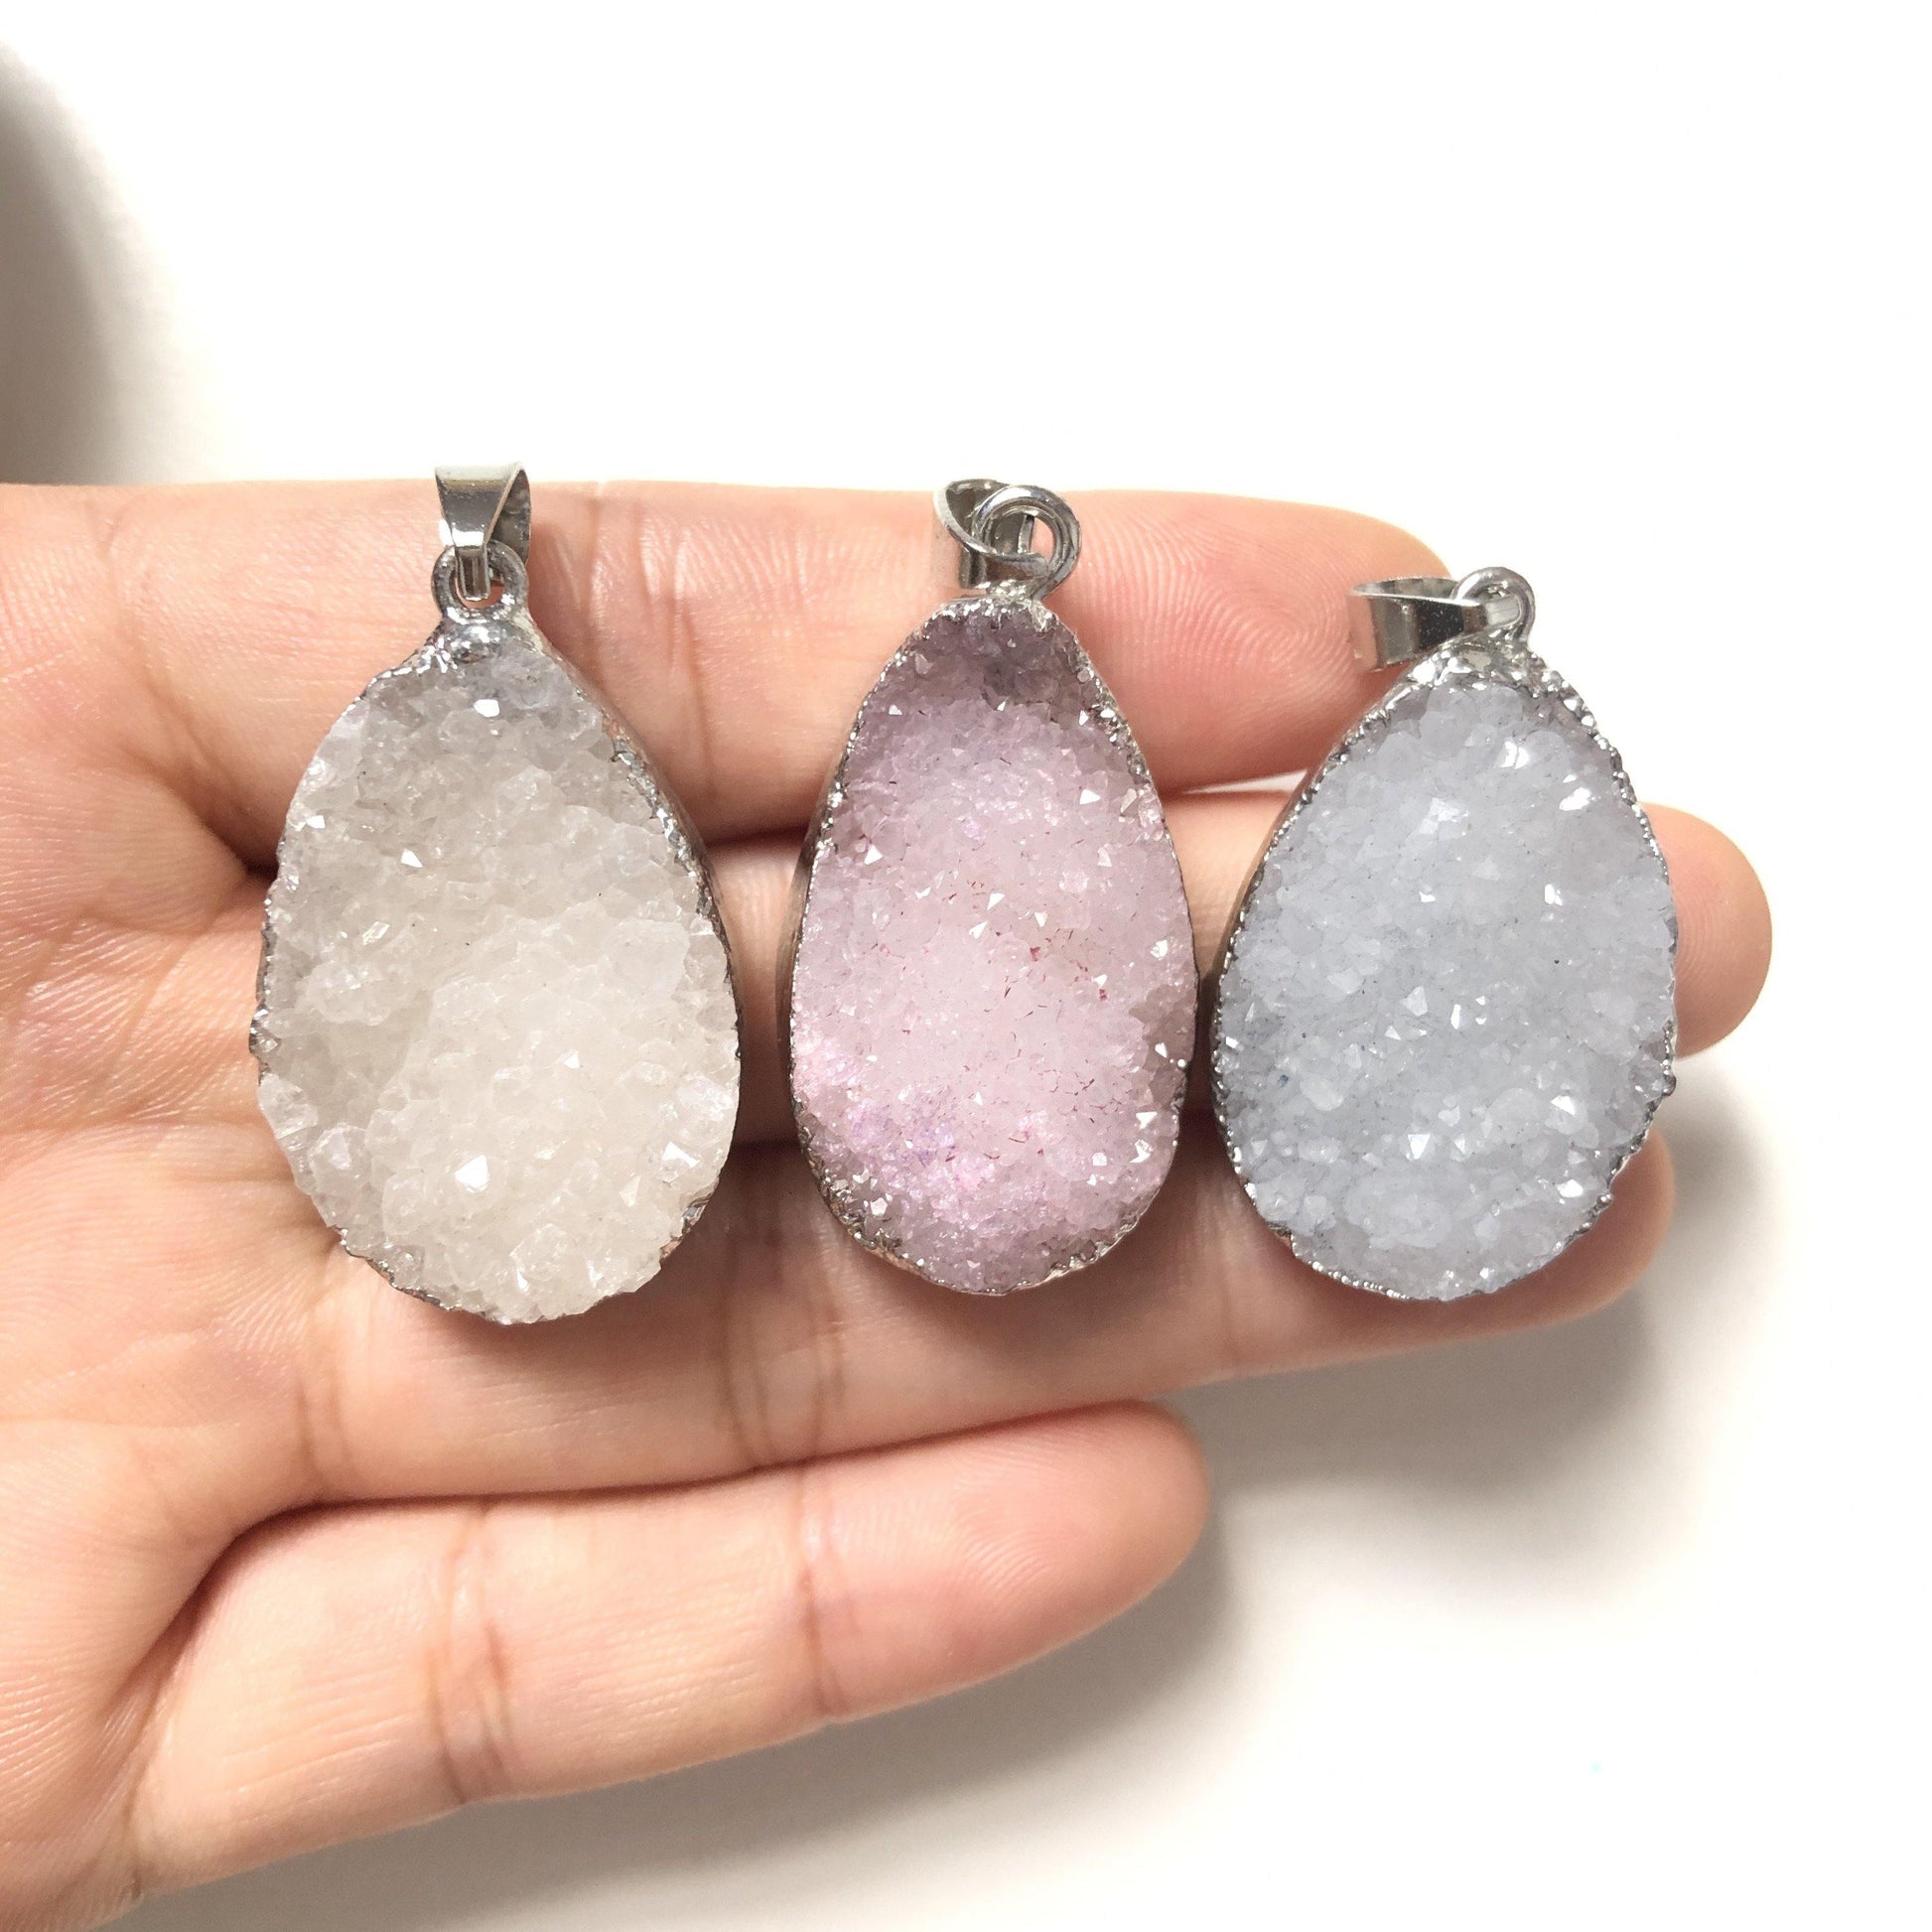 5pcs/lot 30*22mm Waterdrop Shape Natural Agate Druzy Charm-Silver Stone Charms Charms Beads Beyond